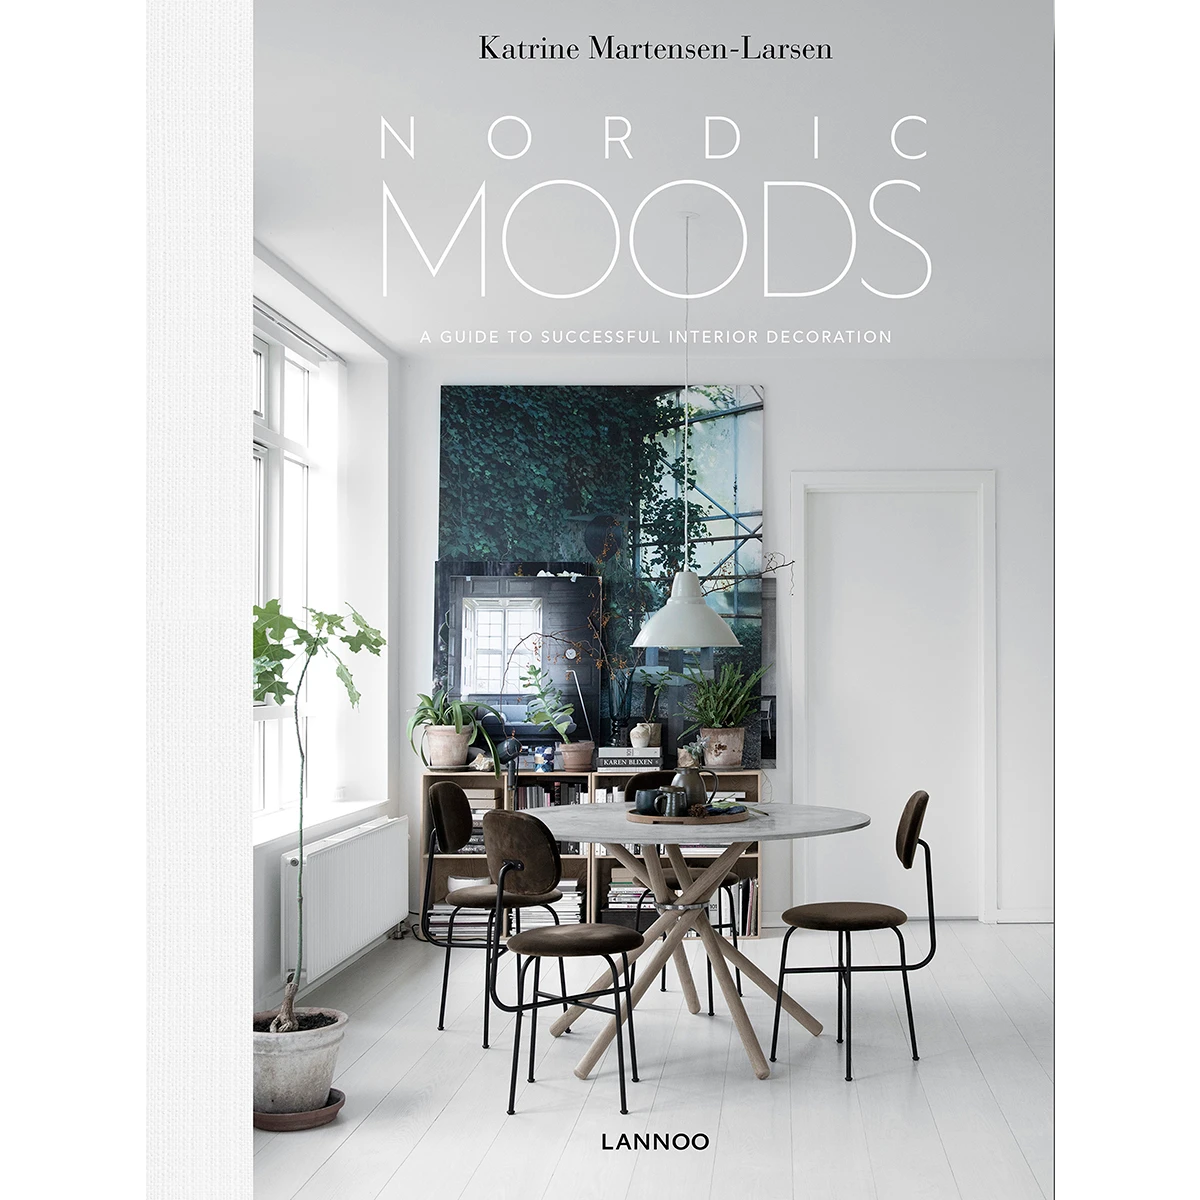 Coffee Table Books from New Mags – Get them online here